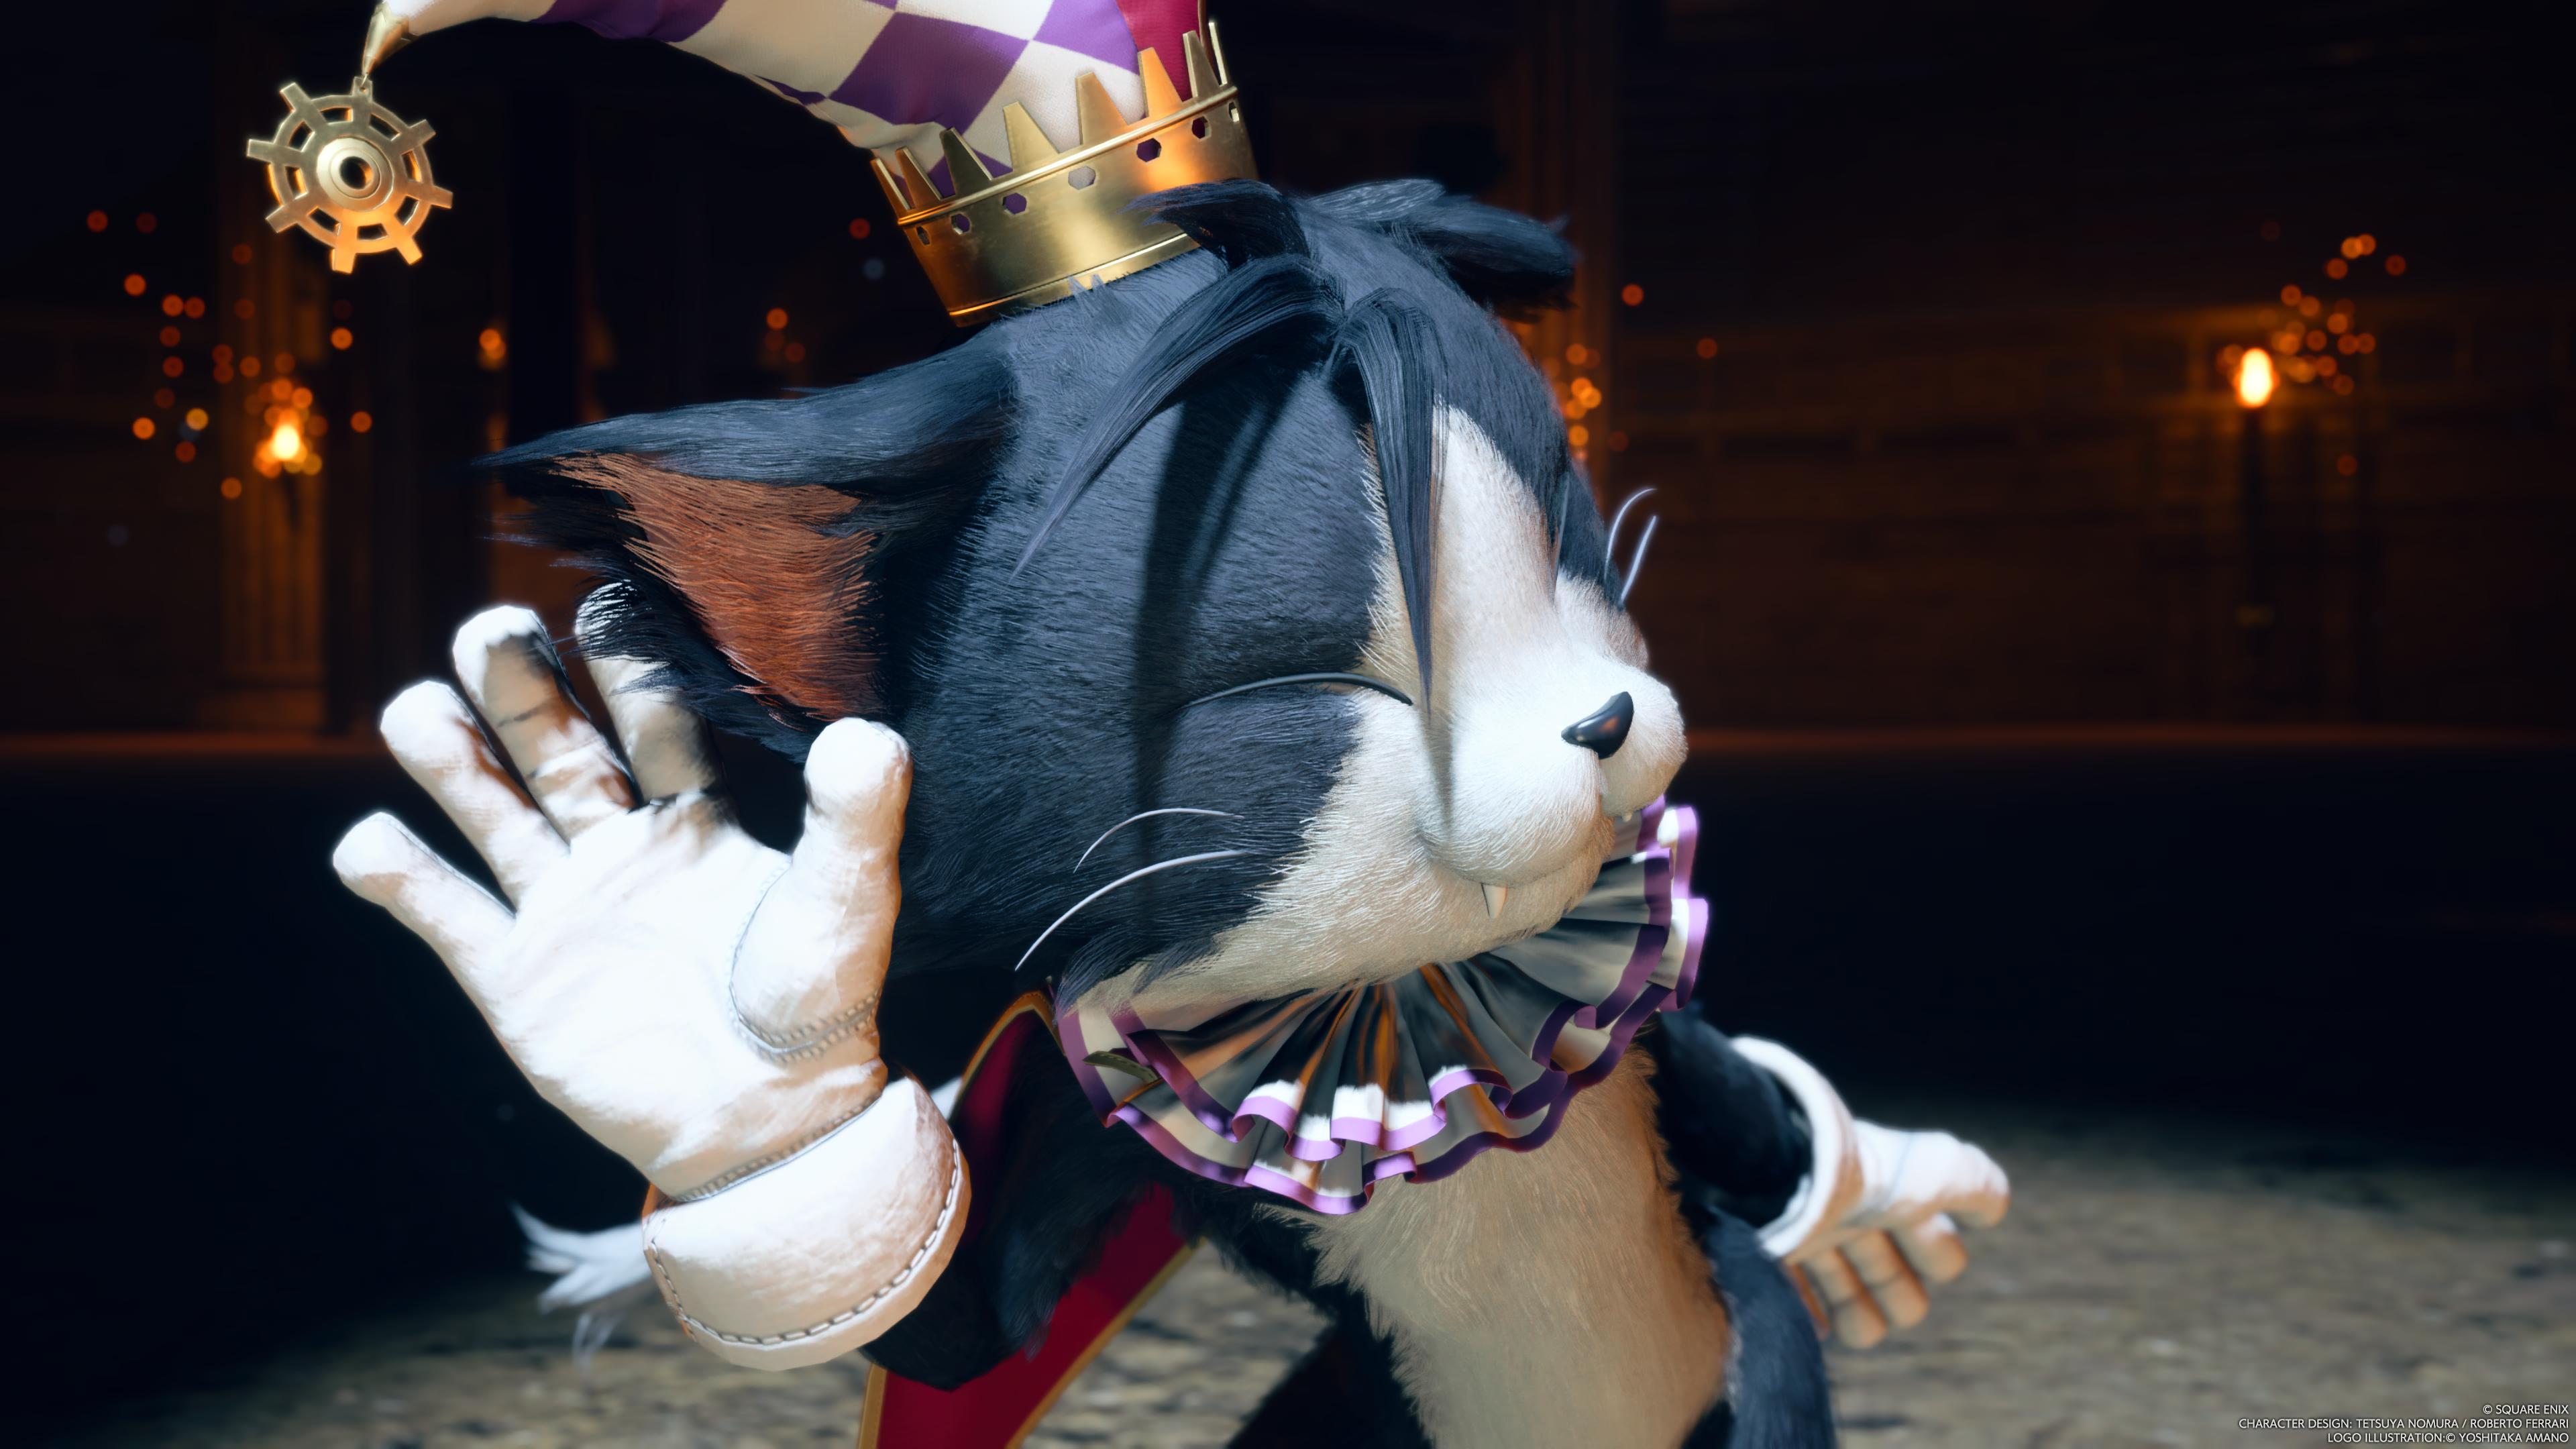 Final Fantasy Vii Rebirth Video Game Characters Cait Sith 3840x2160